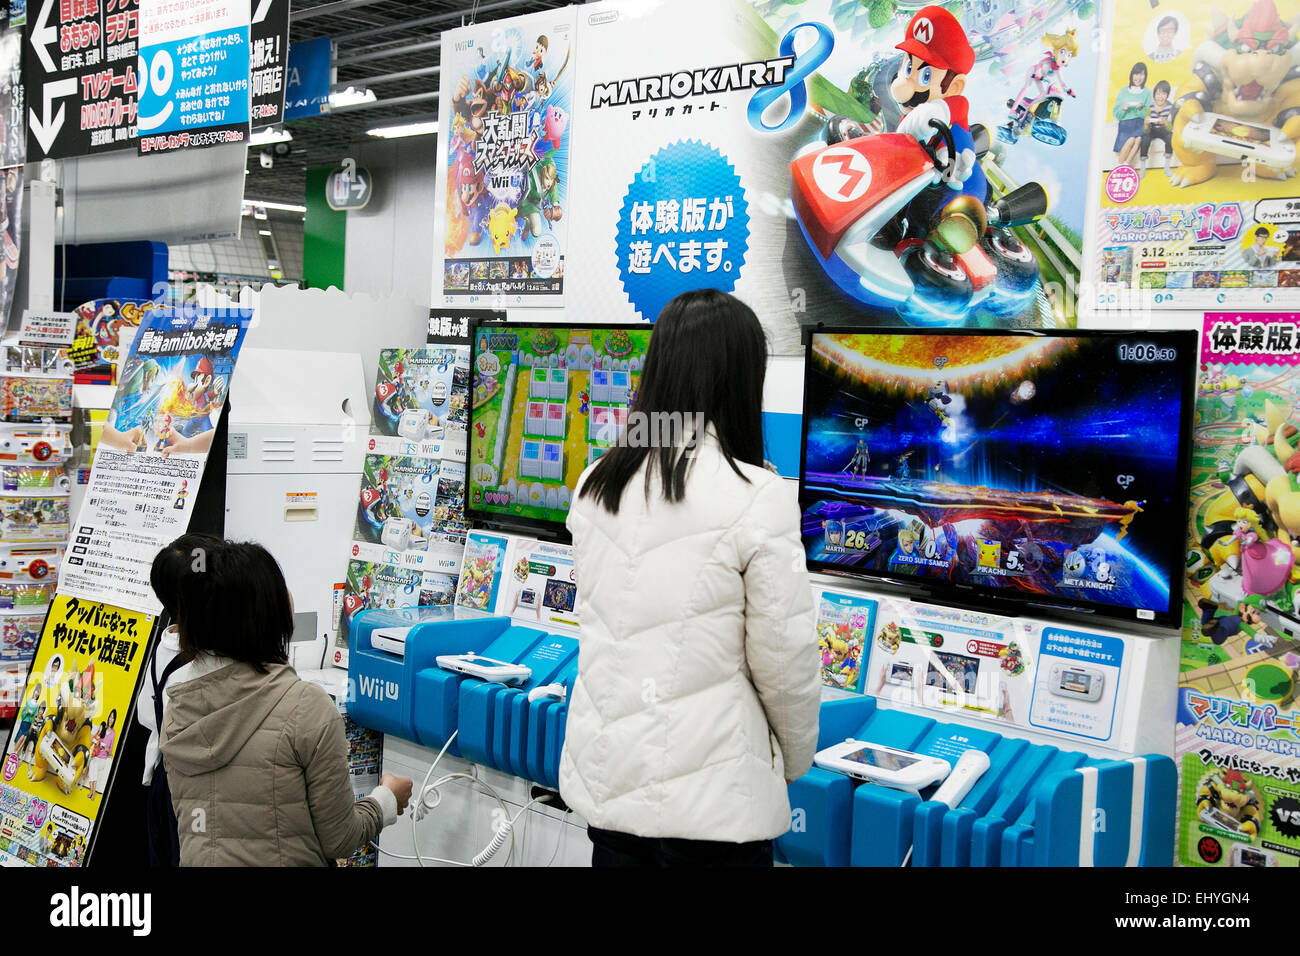 Shoppers Play With Nintendo Wii Consoles At An Electronics Shop In Akihabara District On March 19 15 Tokyo Japan In A Press Conference On Tuesday 17th Nintendo Announced A New Alliance With